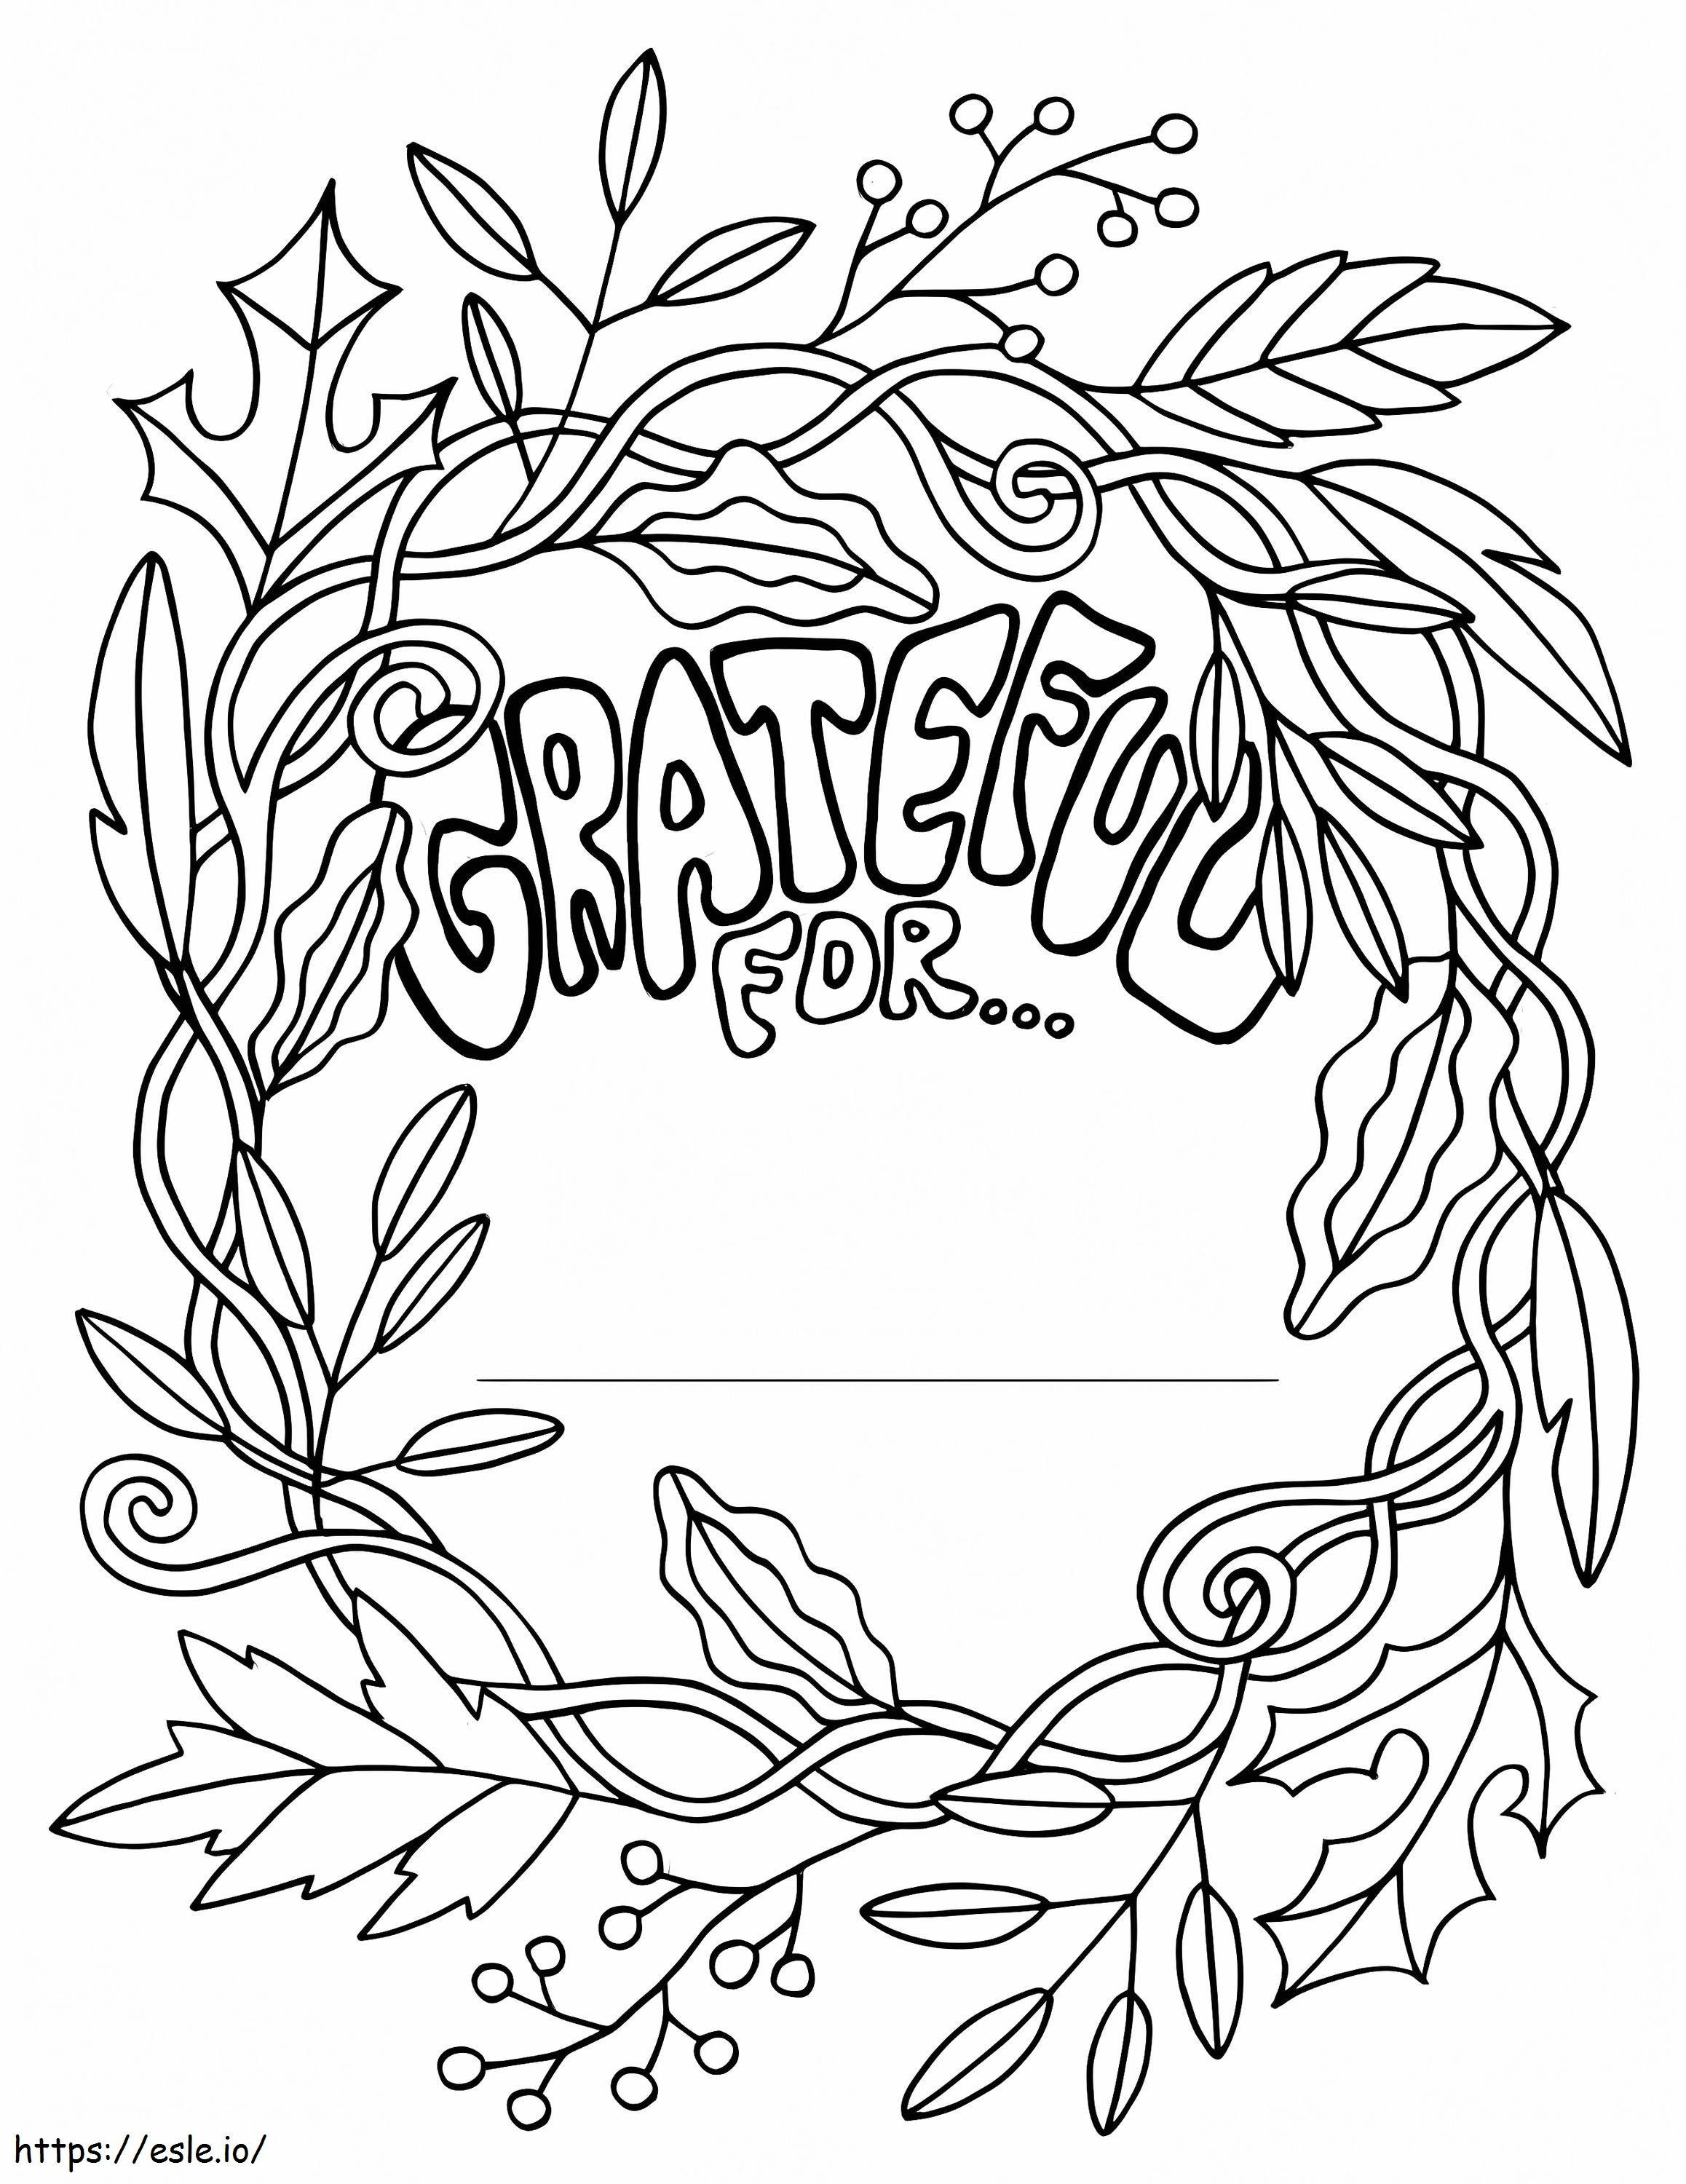 Grateful For coloring page